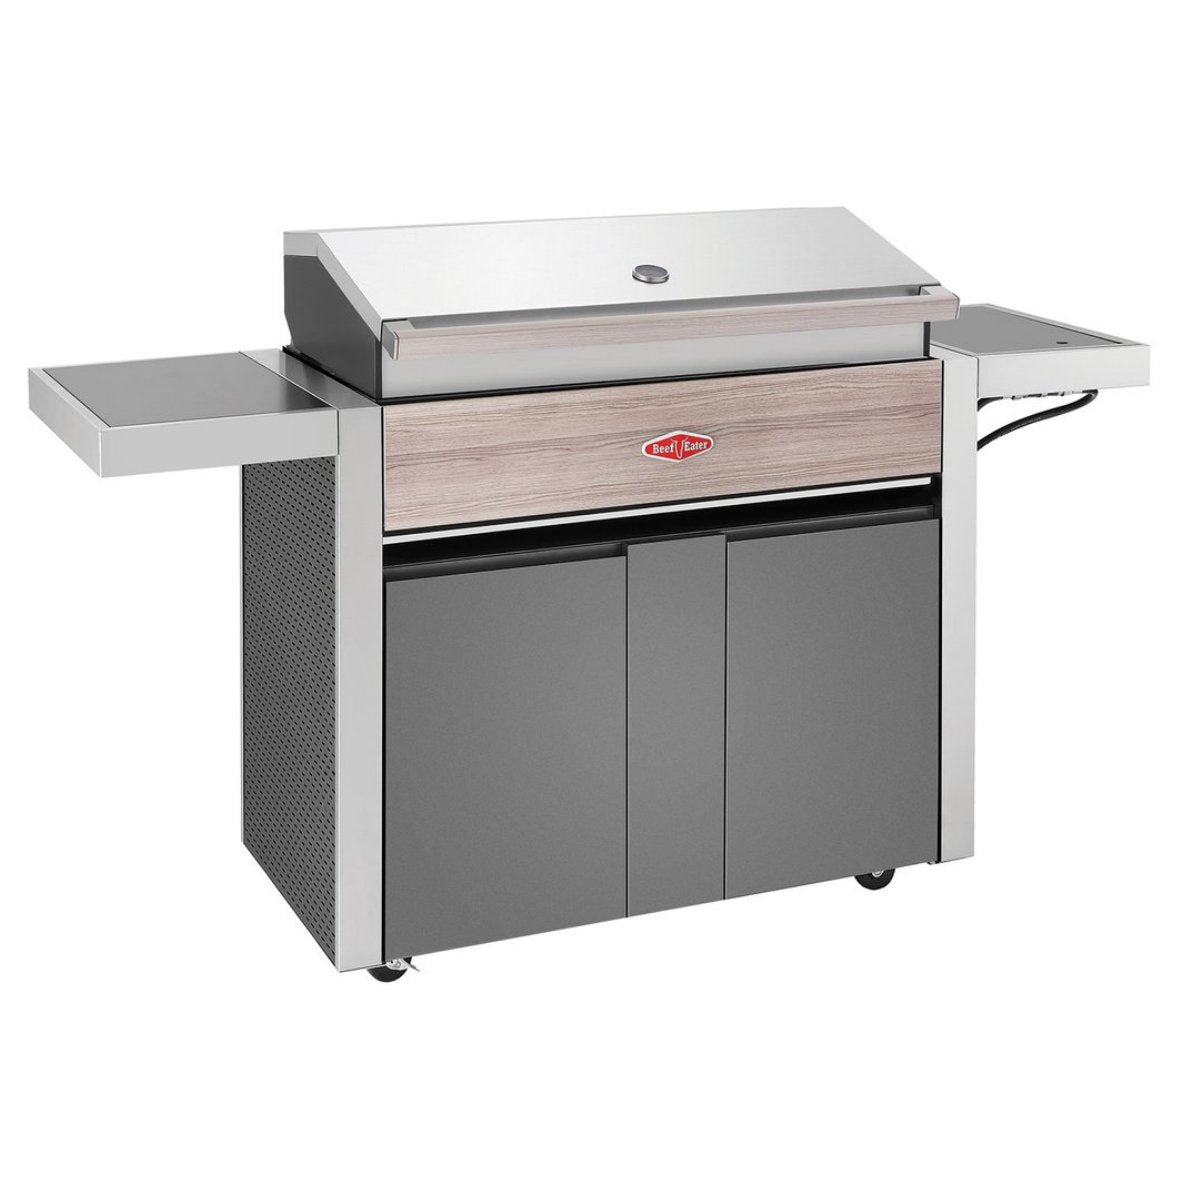 Beefeater 1500 5 Burner Grill and Side Burner with Cart - Kitchen In The Garden